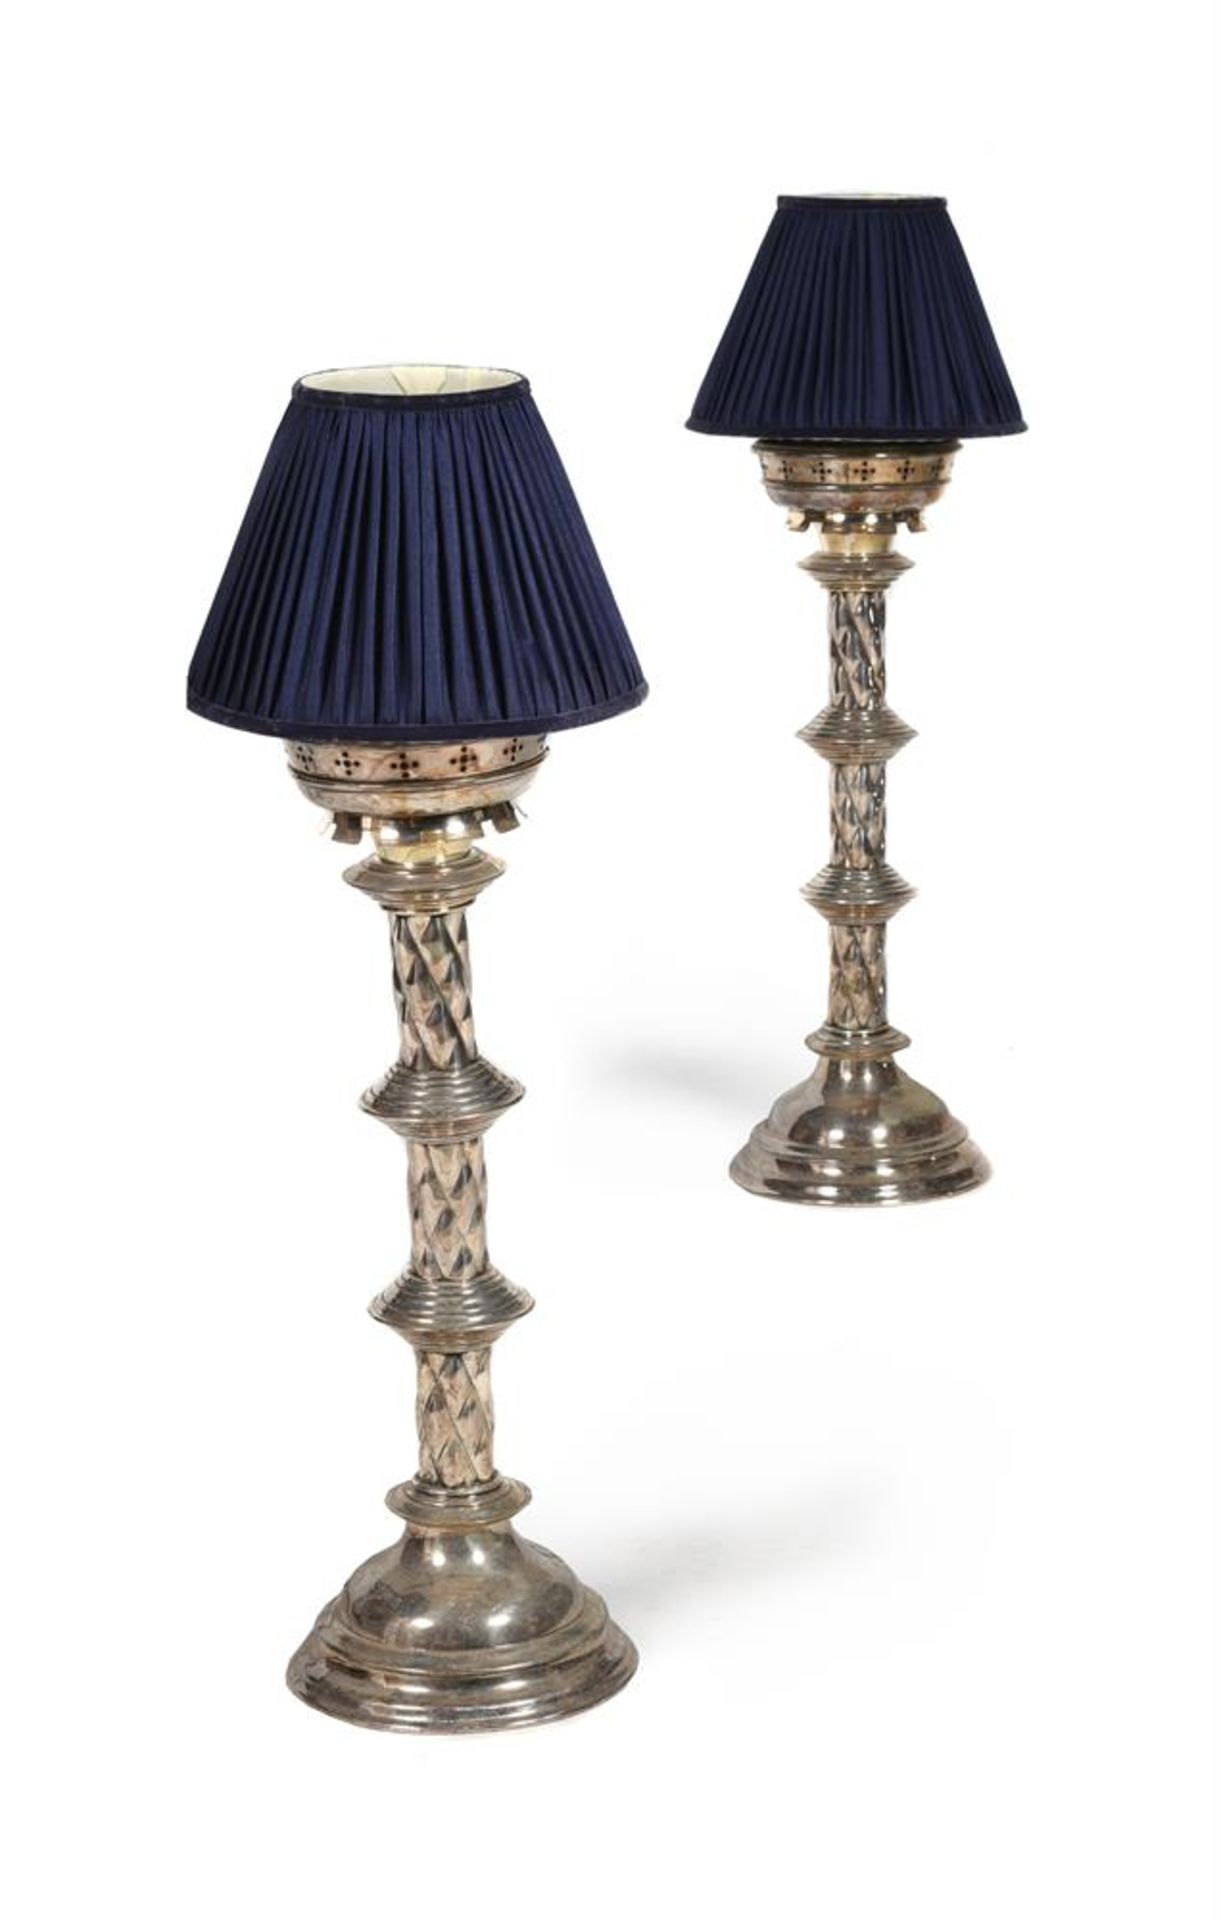 A PAIR OF SILVER PLATED TABLE LAMPS AFTER DESIGNS BY WILLIAM BURGES, LATE 19TH OR EARLY 20TH CENTURY